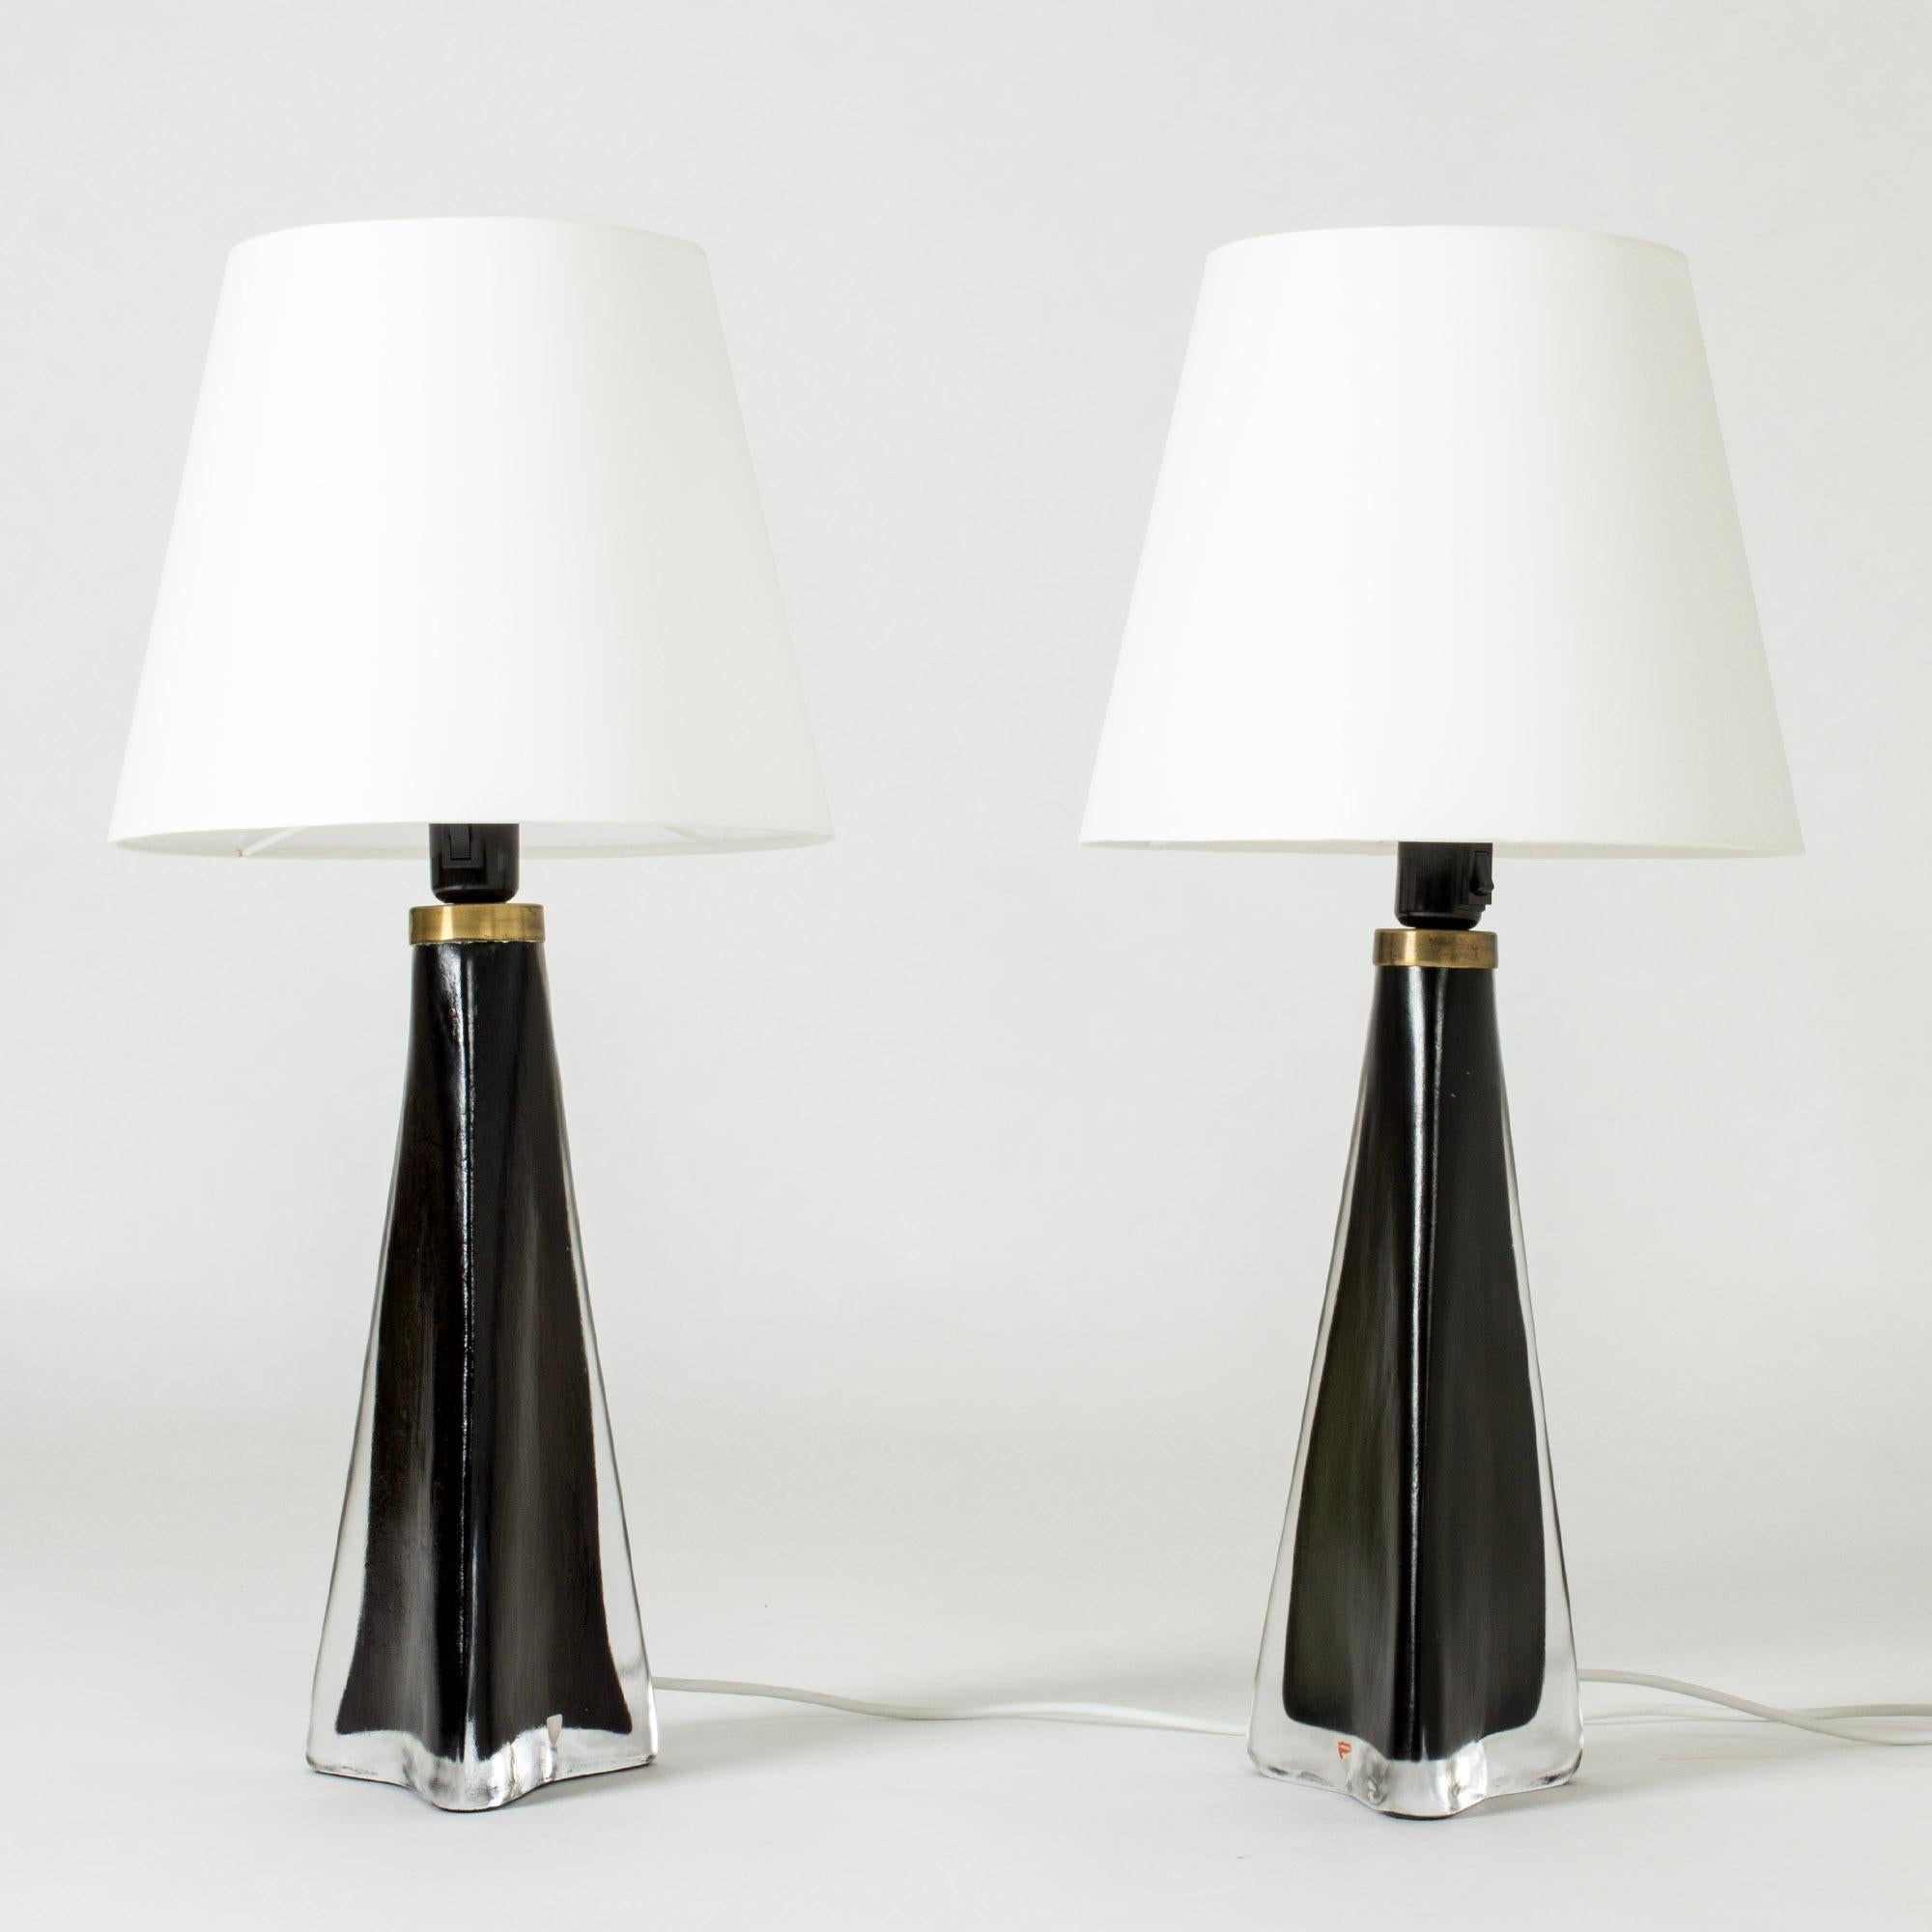 Swedish Midcentury Glass Table Lamps by Carl Fagerlund, Orrefors, Sweden, 1960s